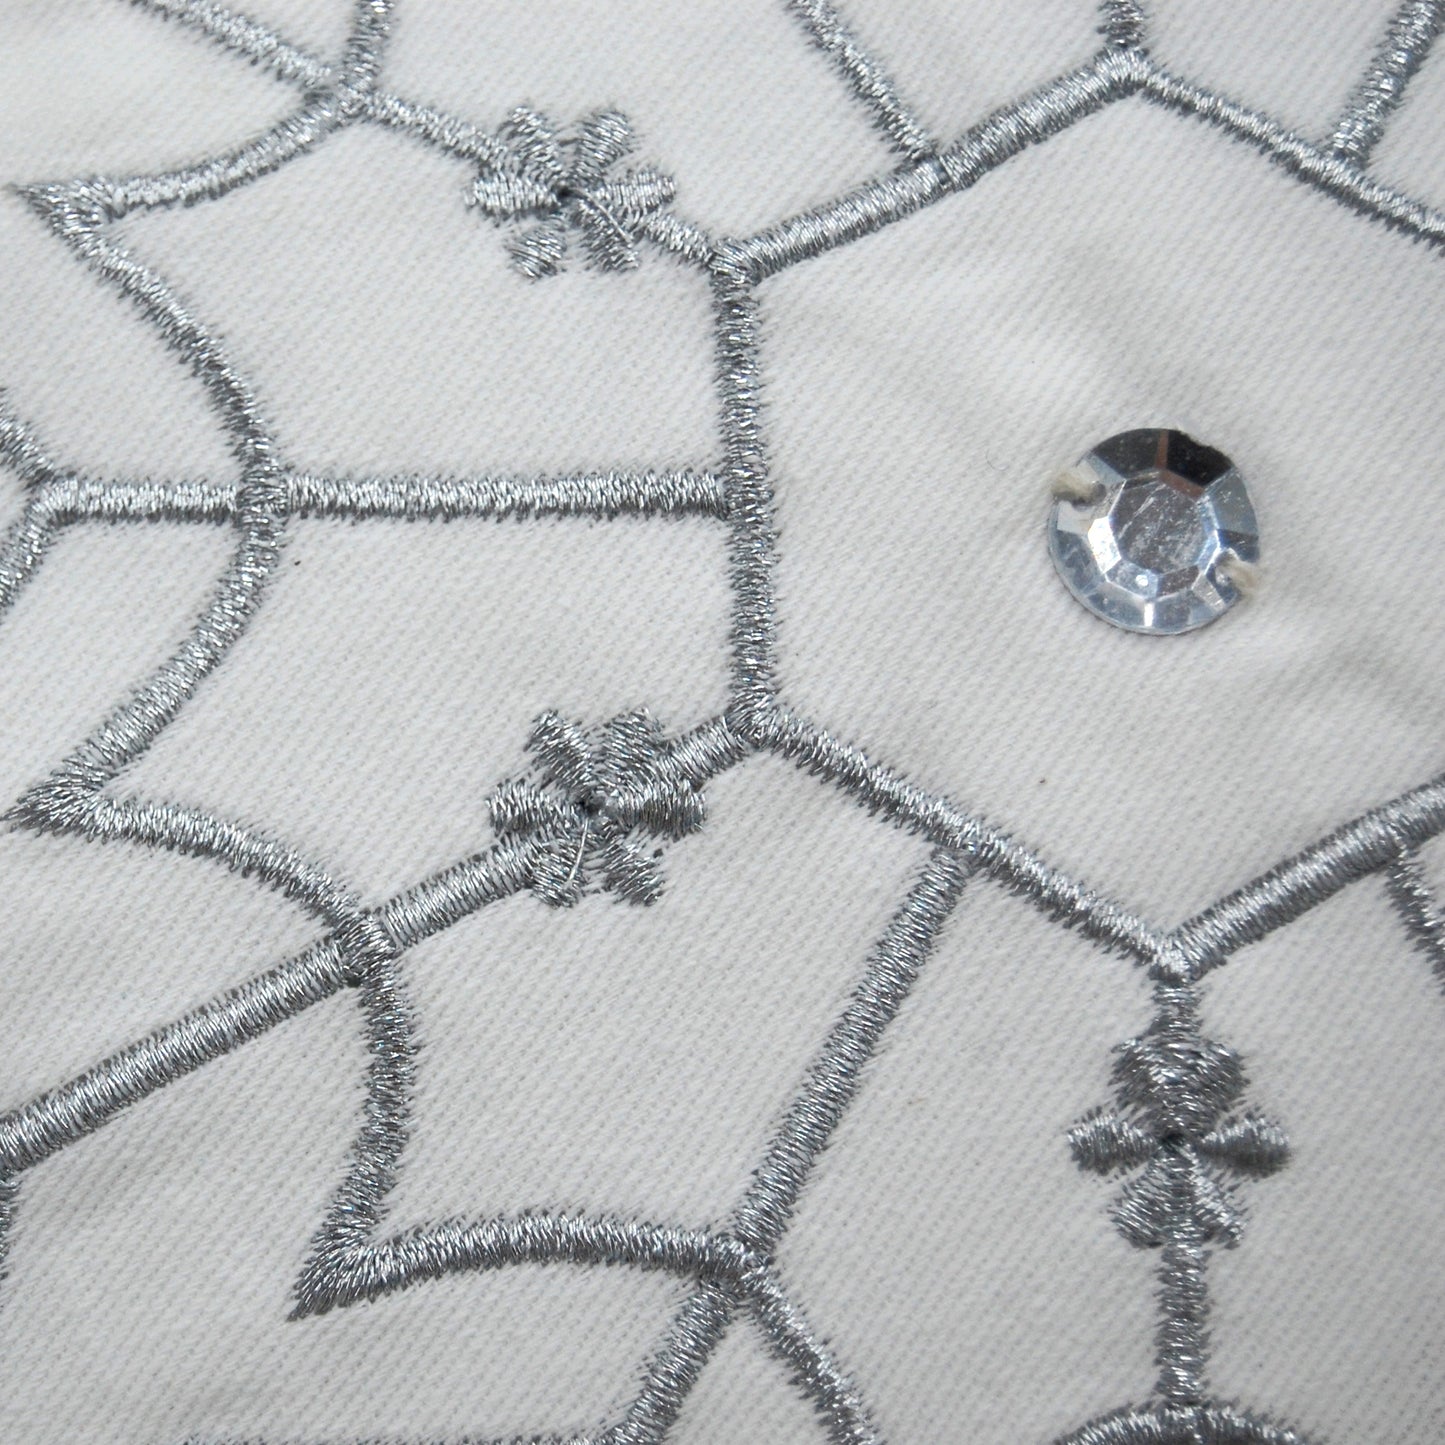 Detail shot of the Snowflake Shaped Pillow.